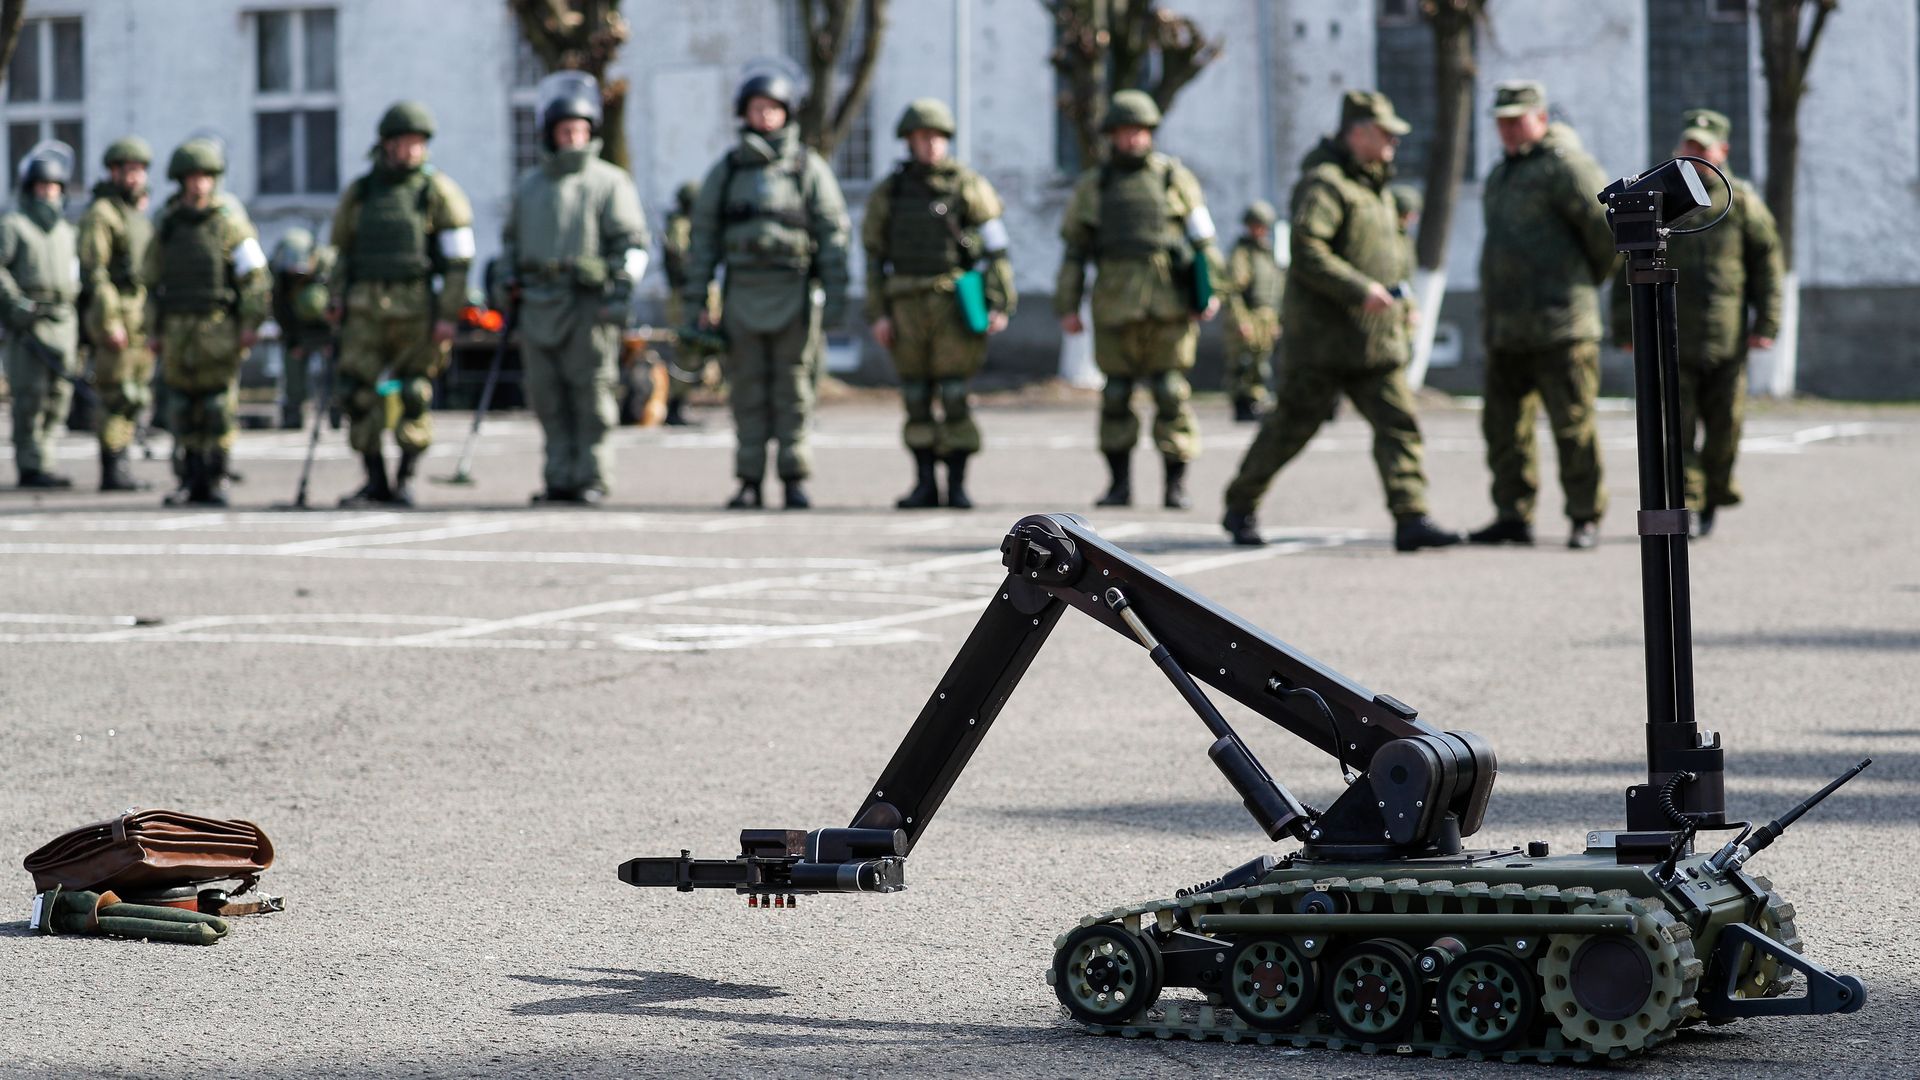 A military robot being tested